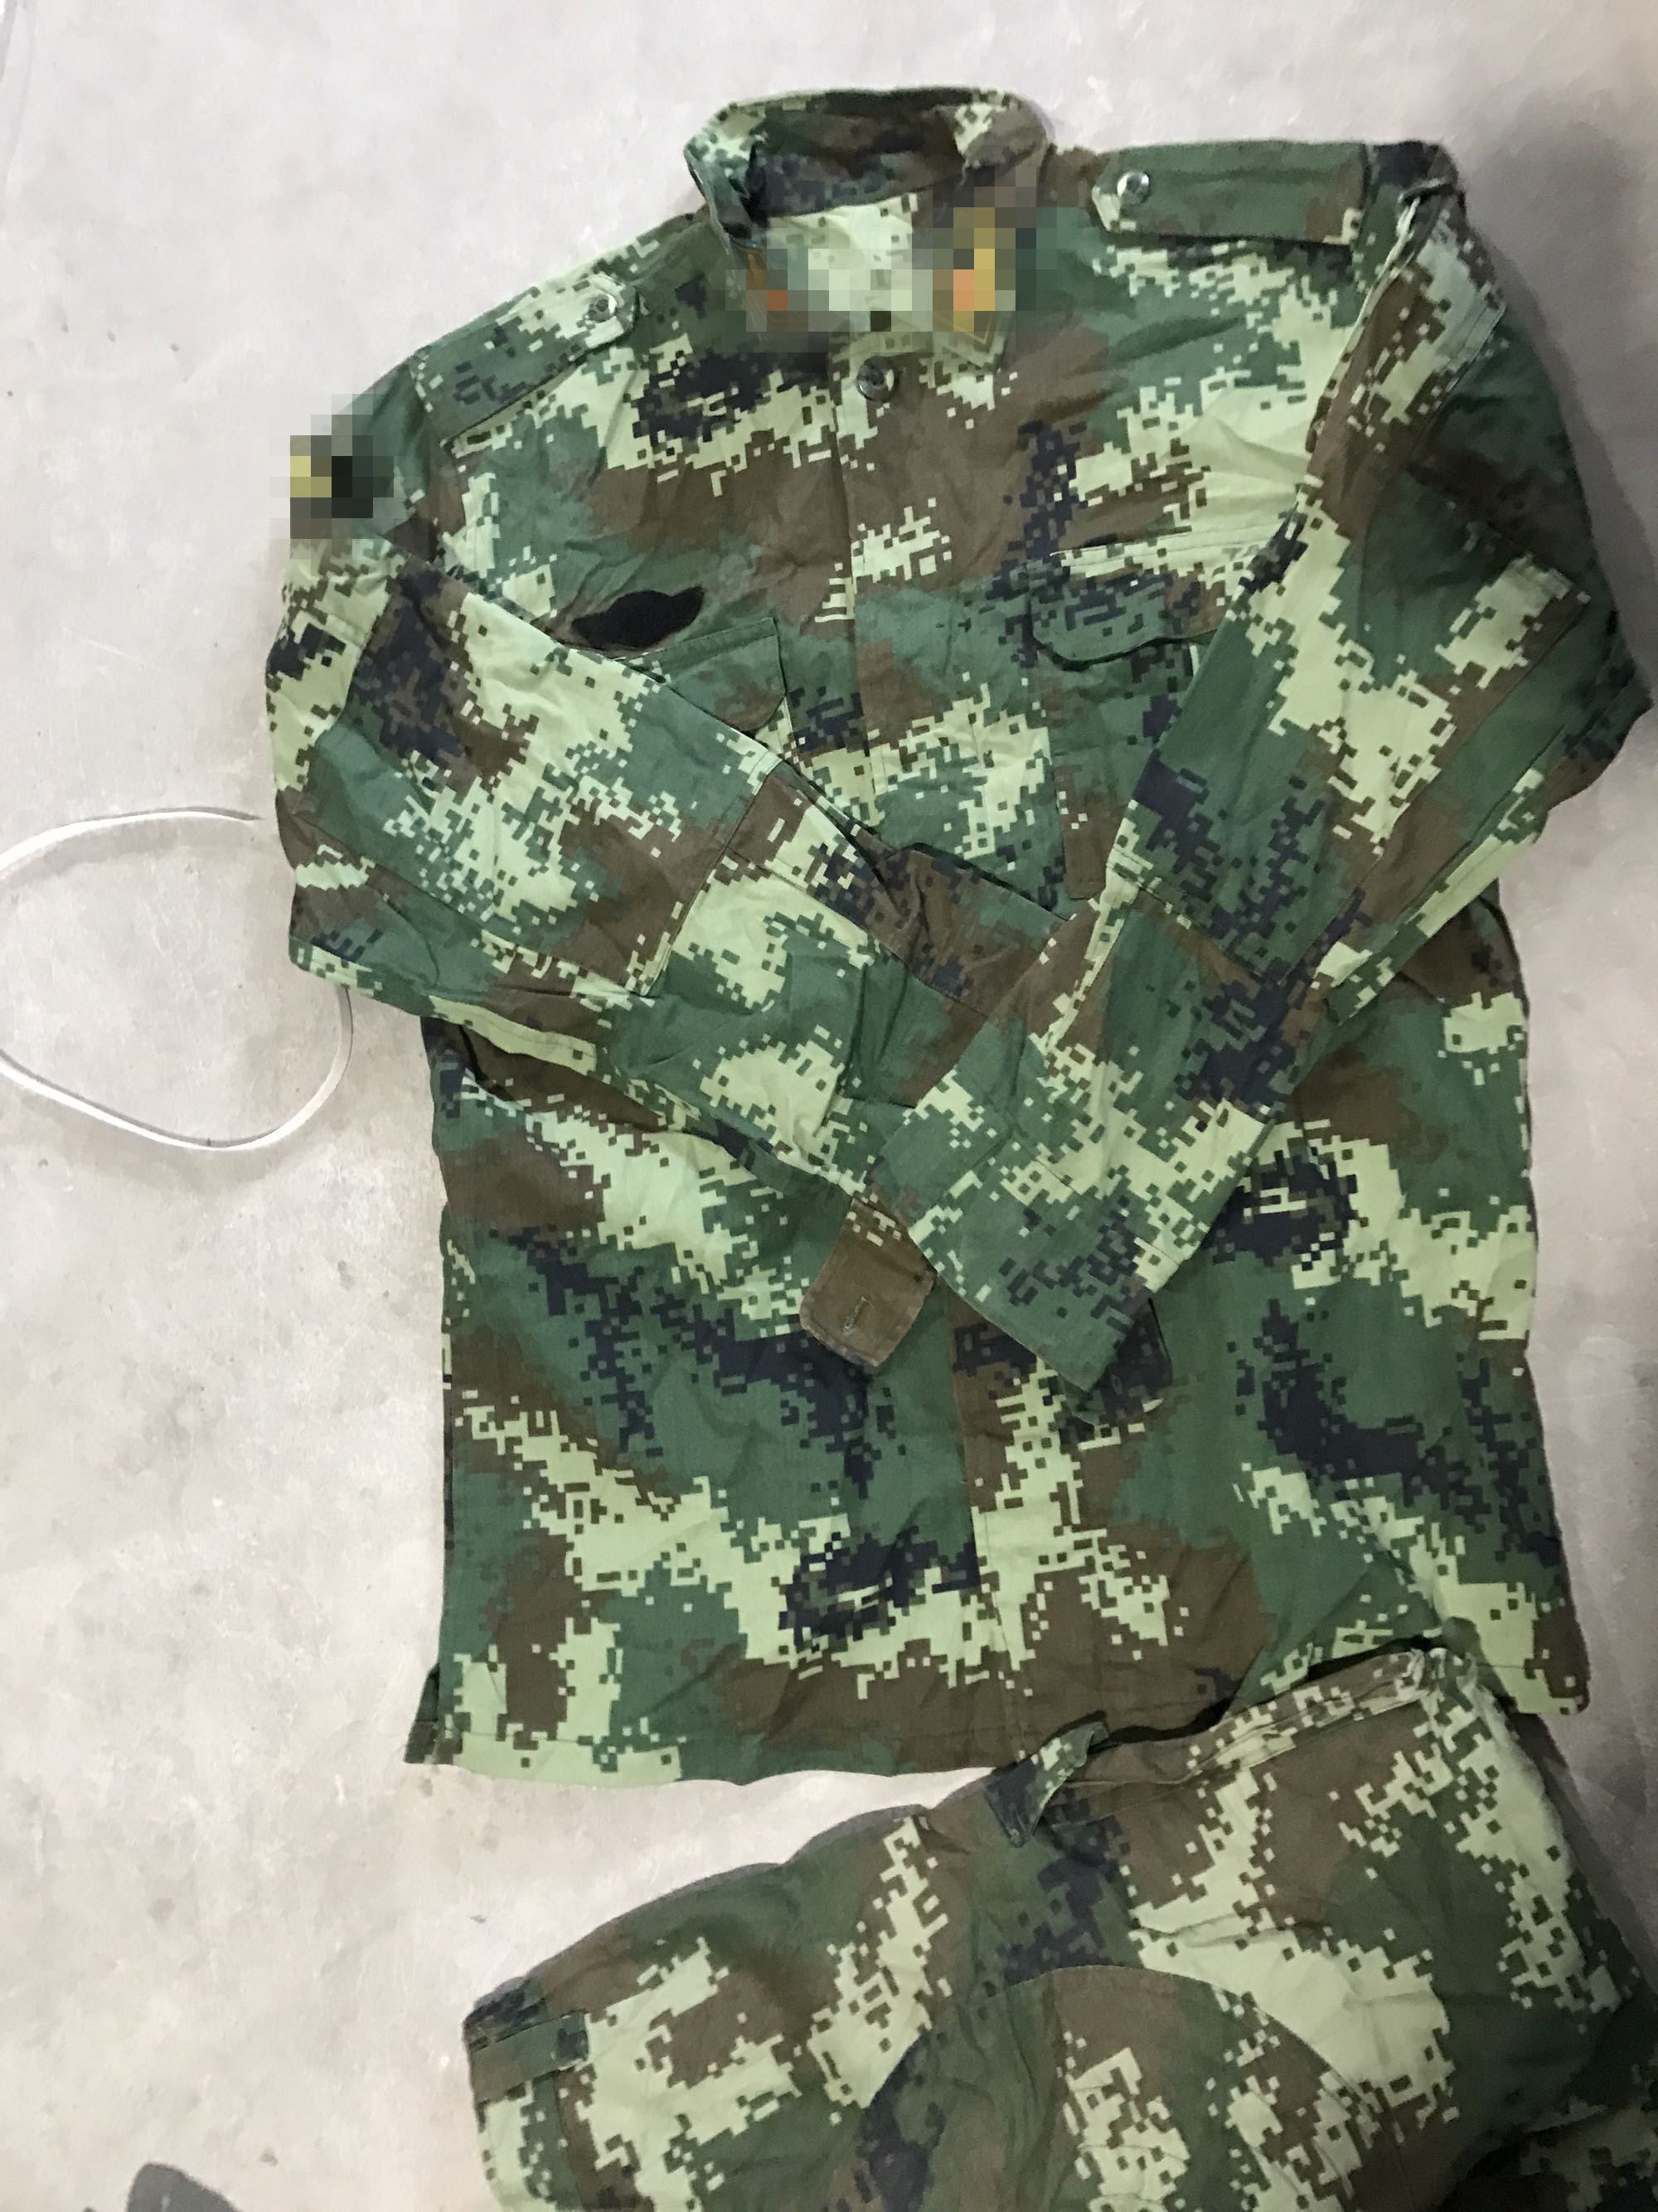 [Secondhand products][Secondhand products]Big flower summer camouflage uniform second-hand digital camouflage suit second-hand 09 summer camouflage turn in camouflage